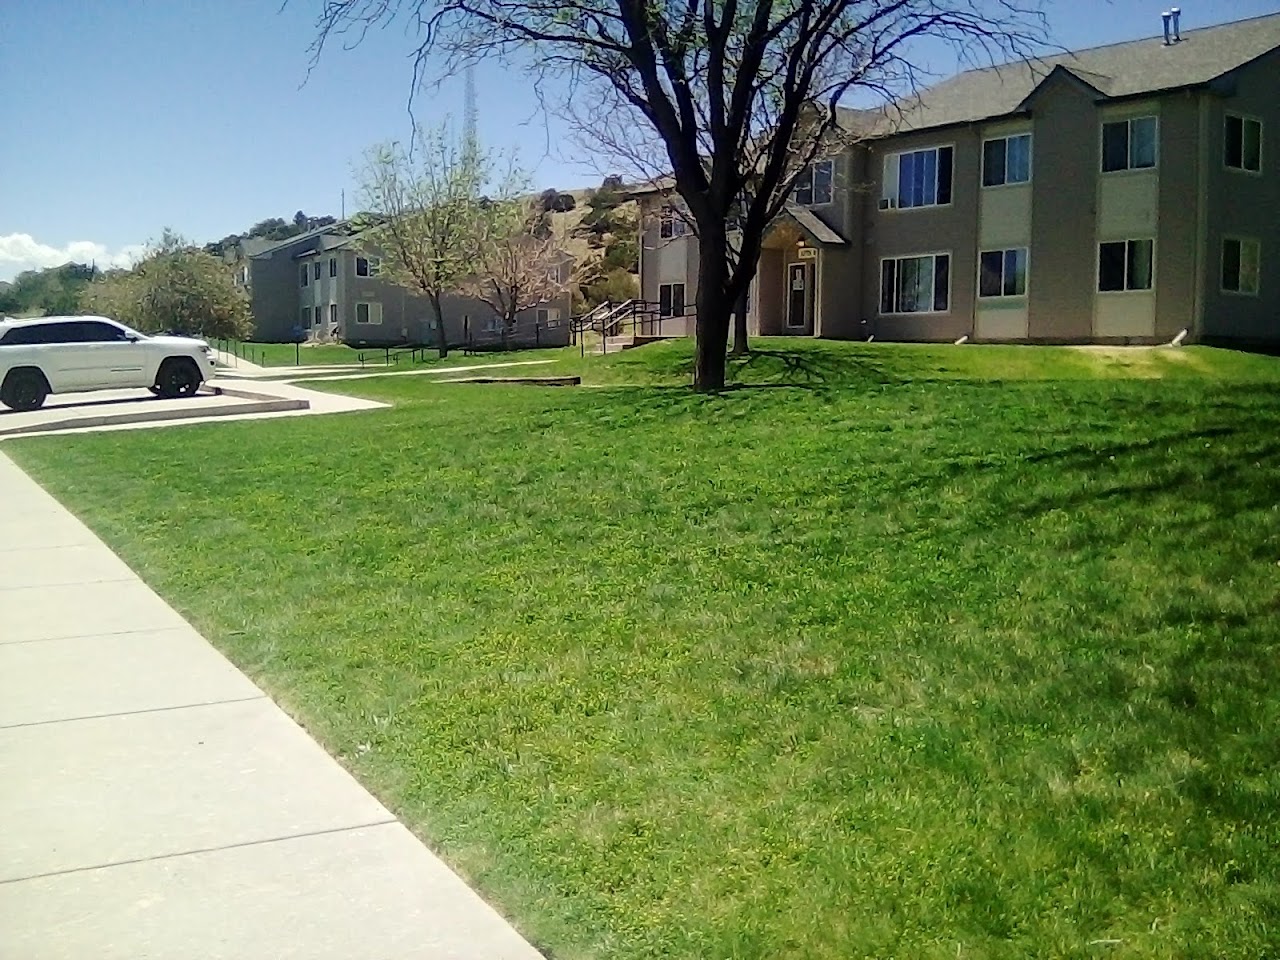 Photo of SPANISH PEAKS APTS. Affordable housing located at 900 INDIANA AVE WALSENBURG, CO 81089